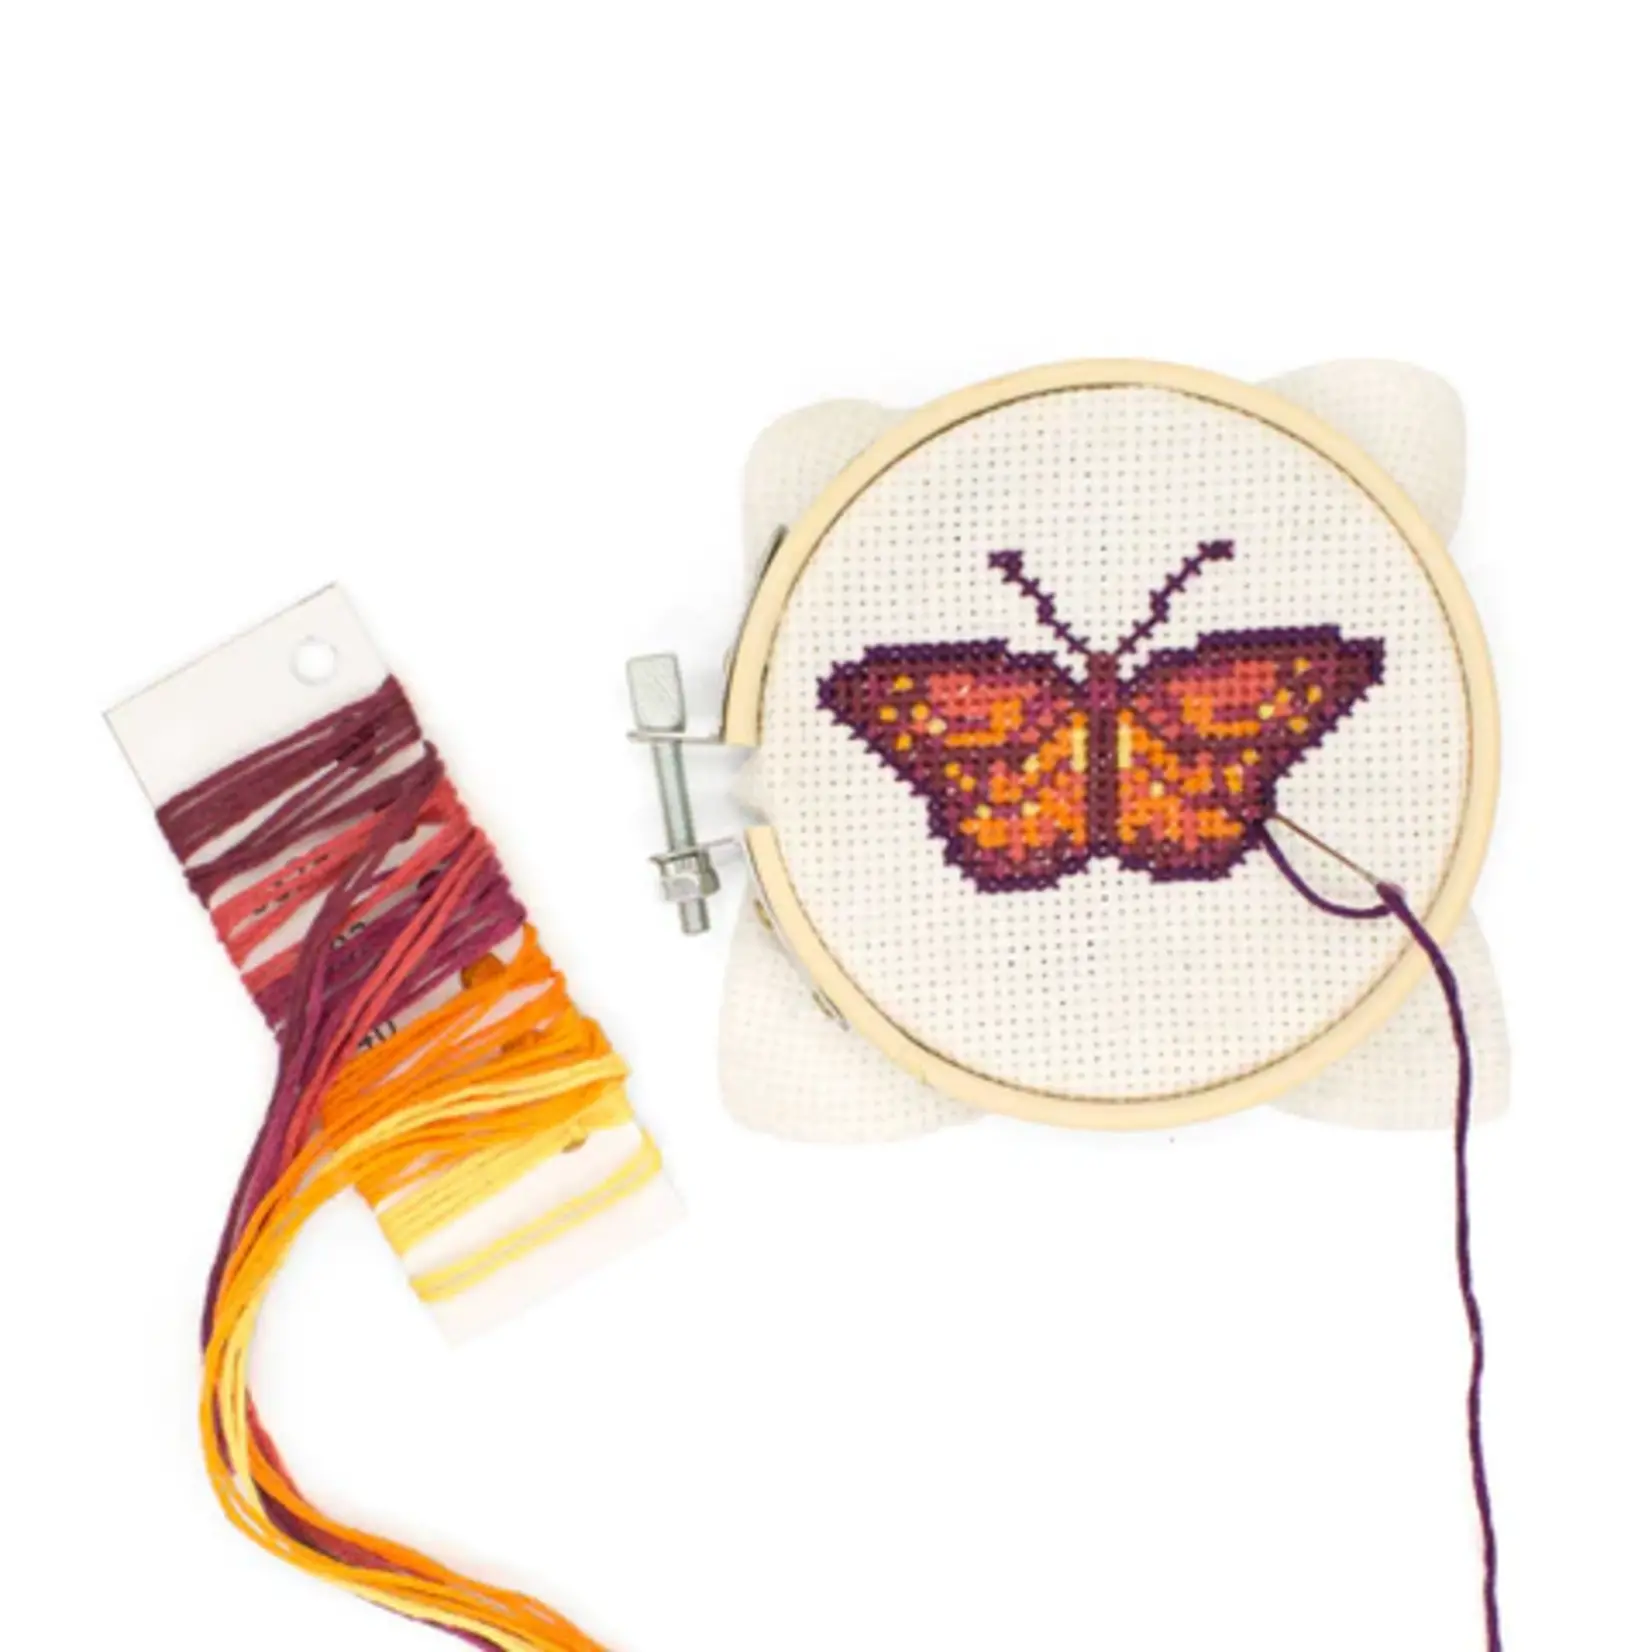 Home Decor Mini Cross Stitch Embroidery Kit-Butterfly